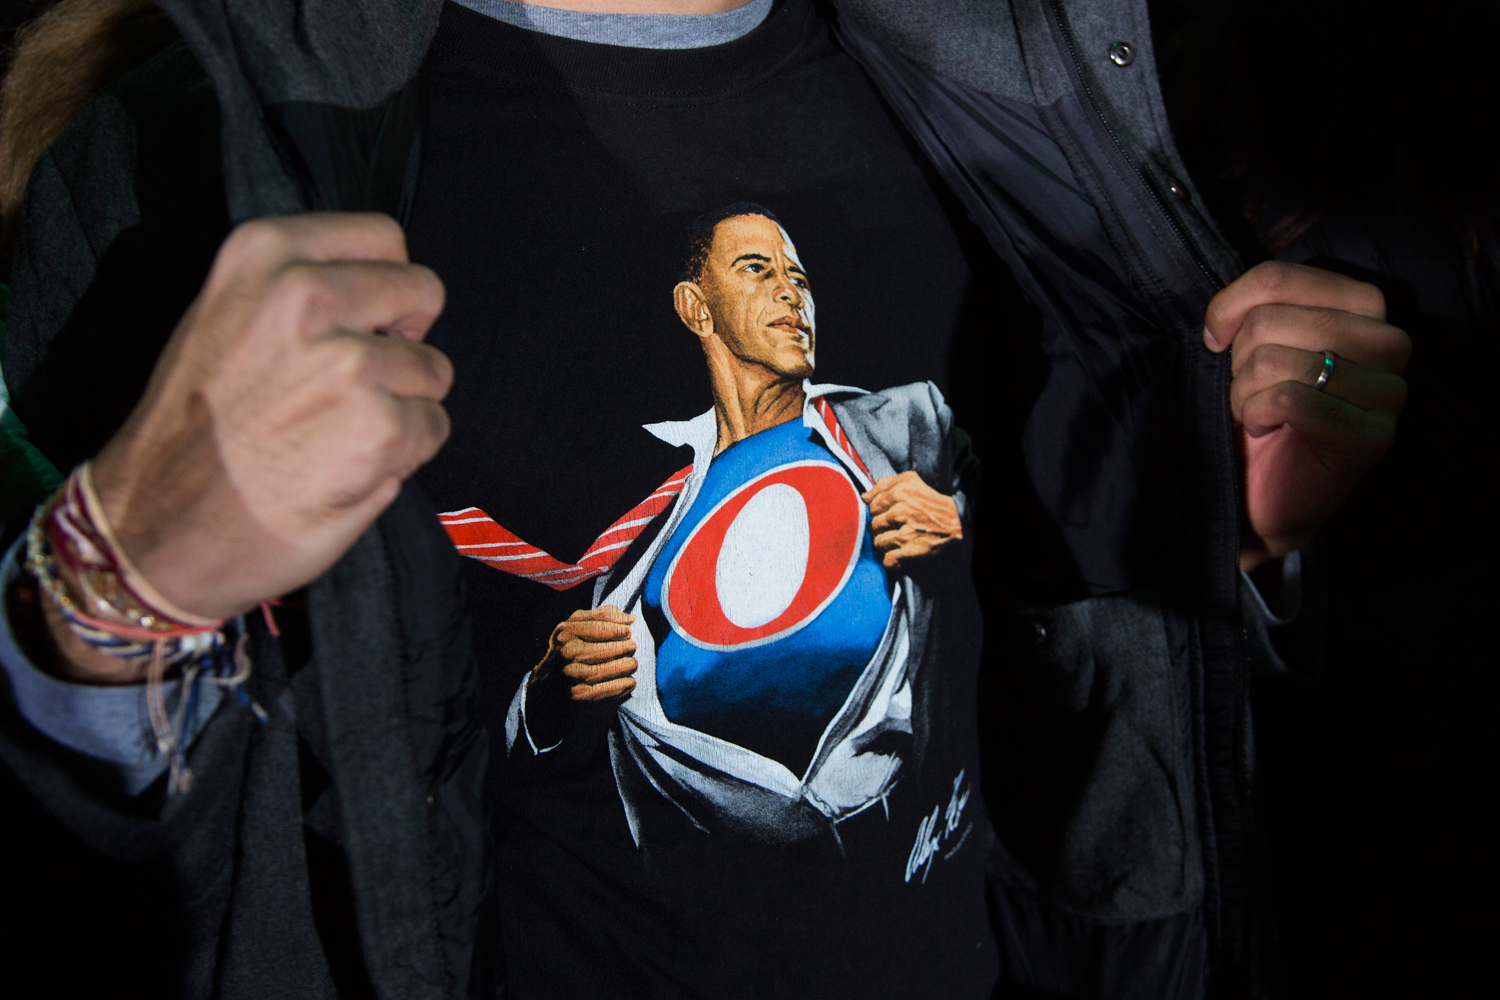 Image: A supporter shows off his tee-shirt at a campaign event with President Obama in Hilliard, Ohio. Nov. 2, 2012.